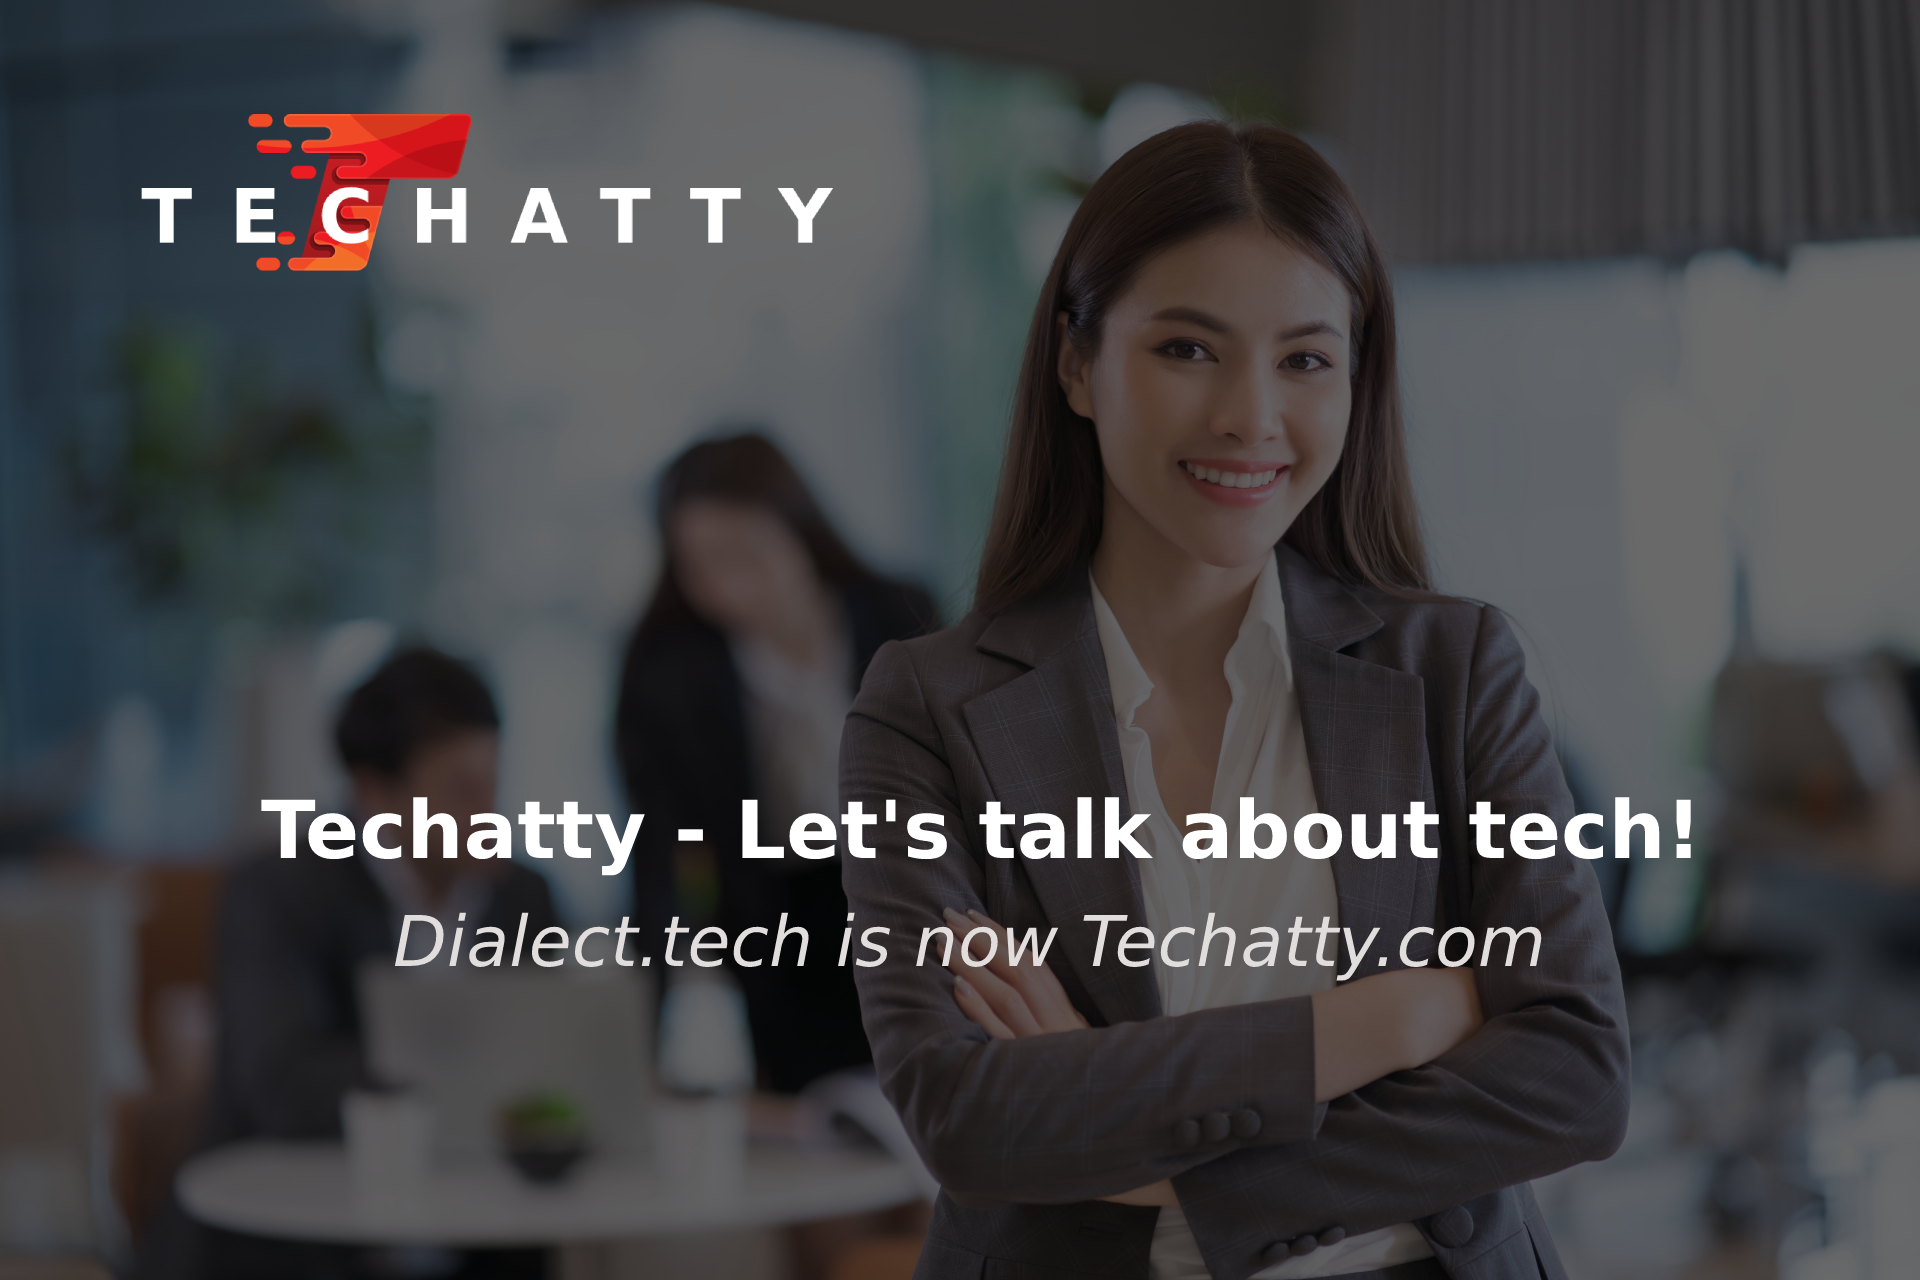 Say hello to Techatty.com - formally Dialect.tech